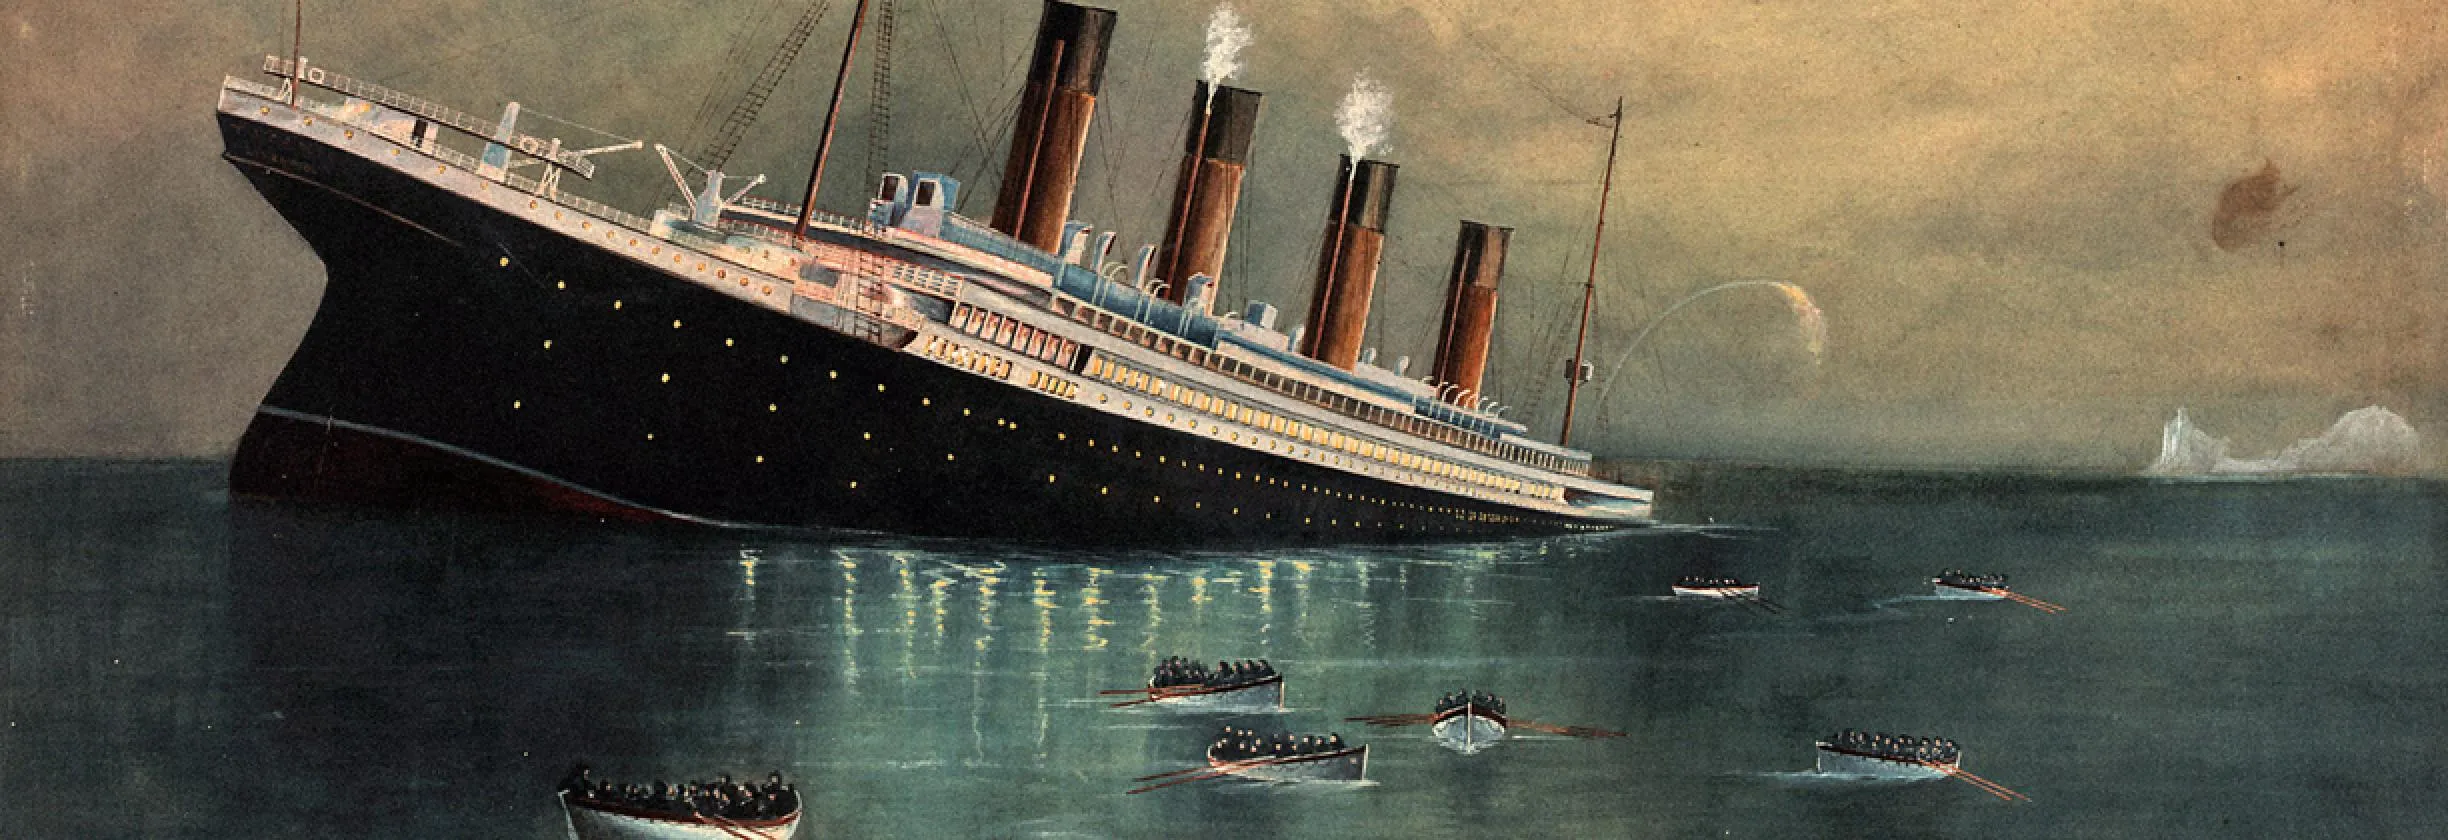 atlantic liner titanic br 1912 sinking bow first 1912 with eight full lifeboats nearby and an iceberg in the distance banner